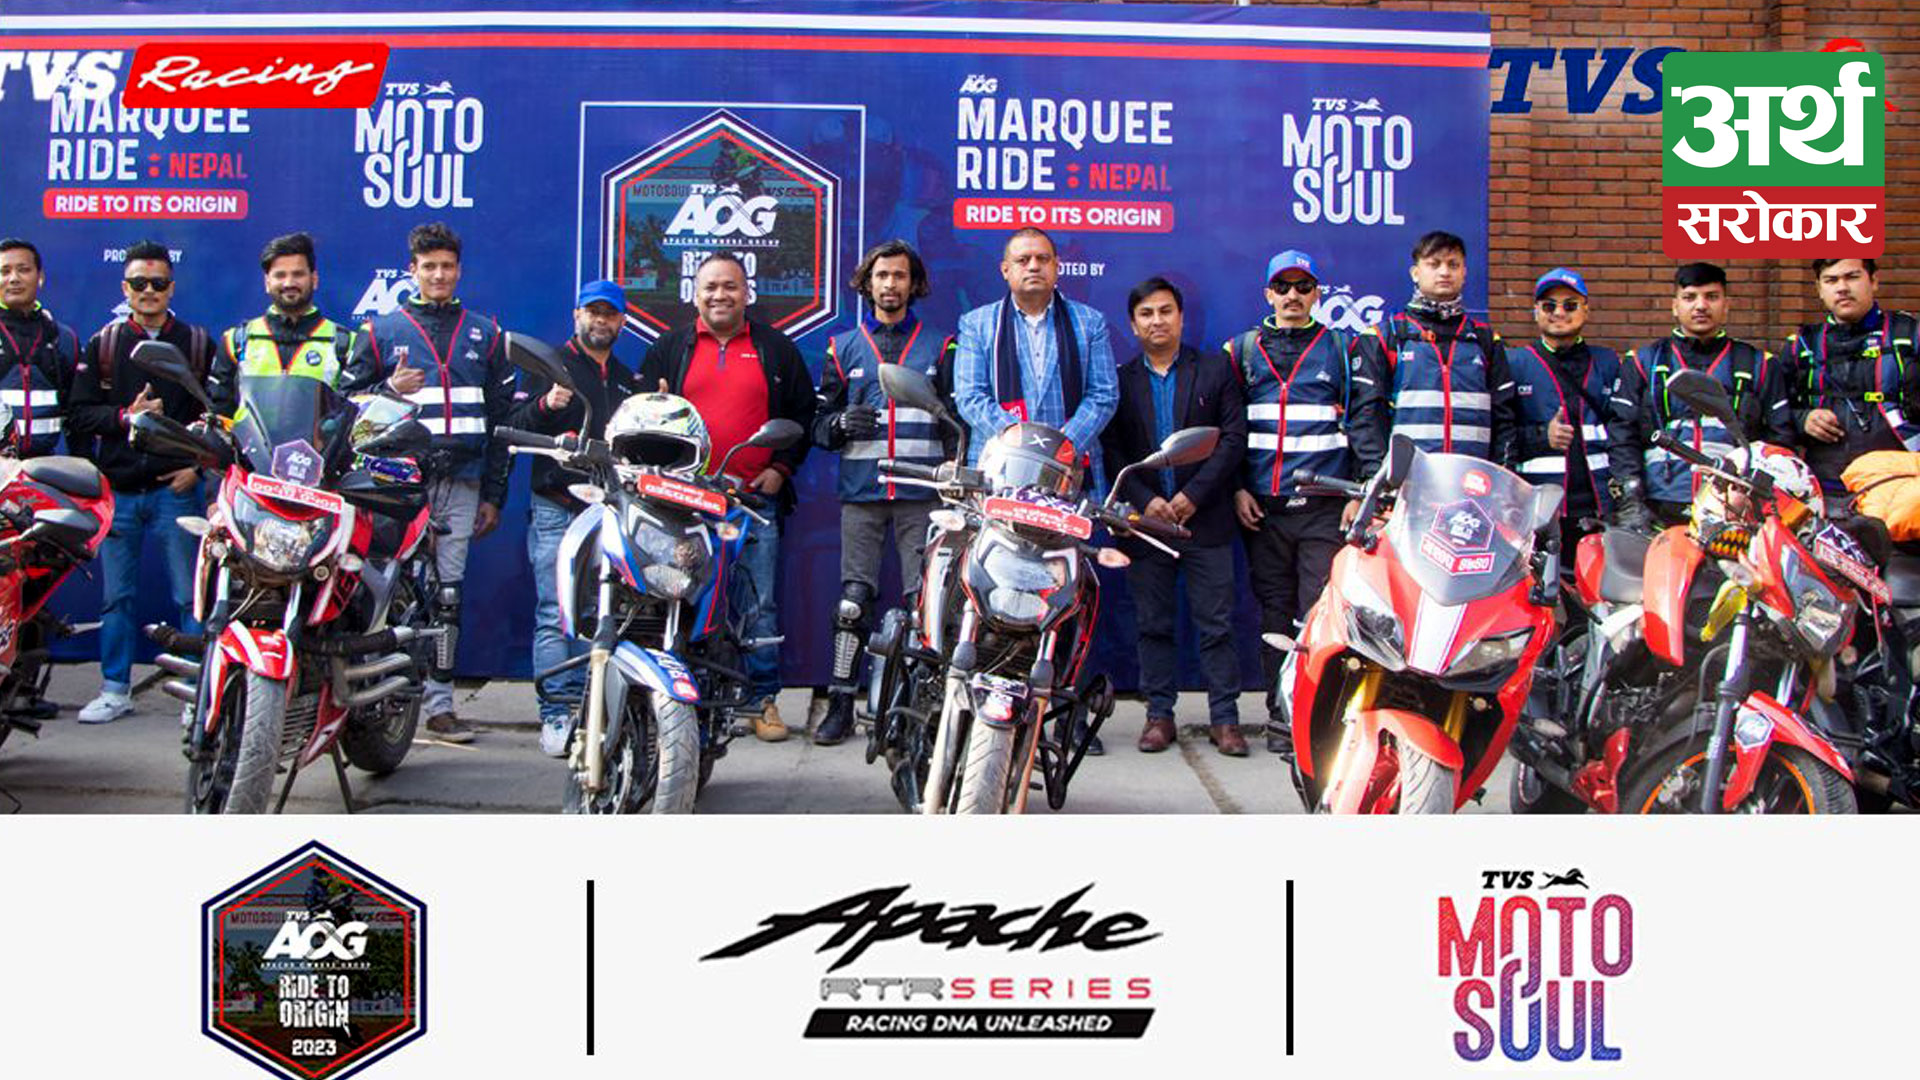 TVS’s first international AOG, Marquee Ride reaches India